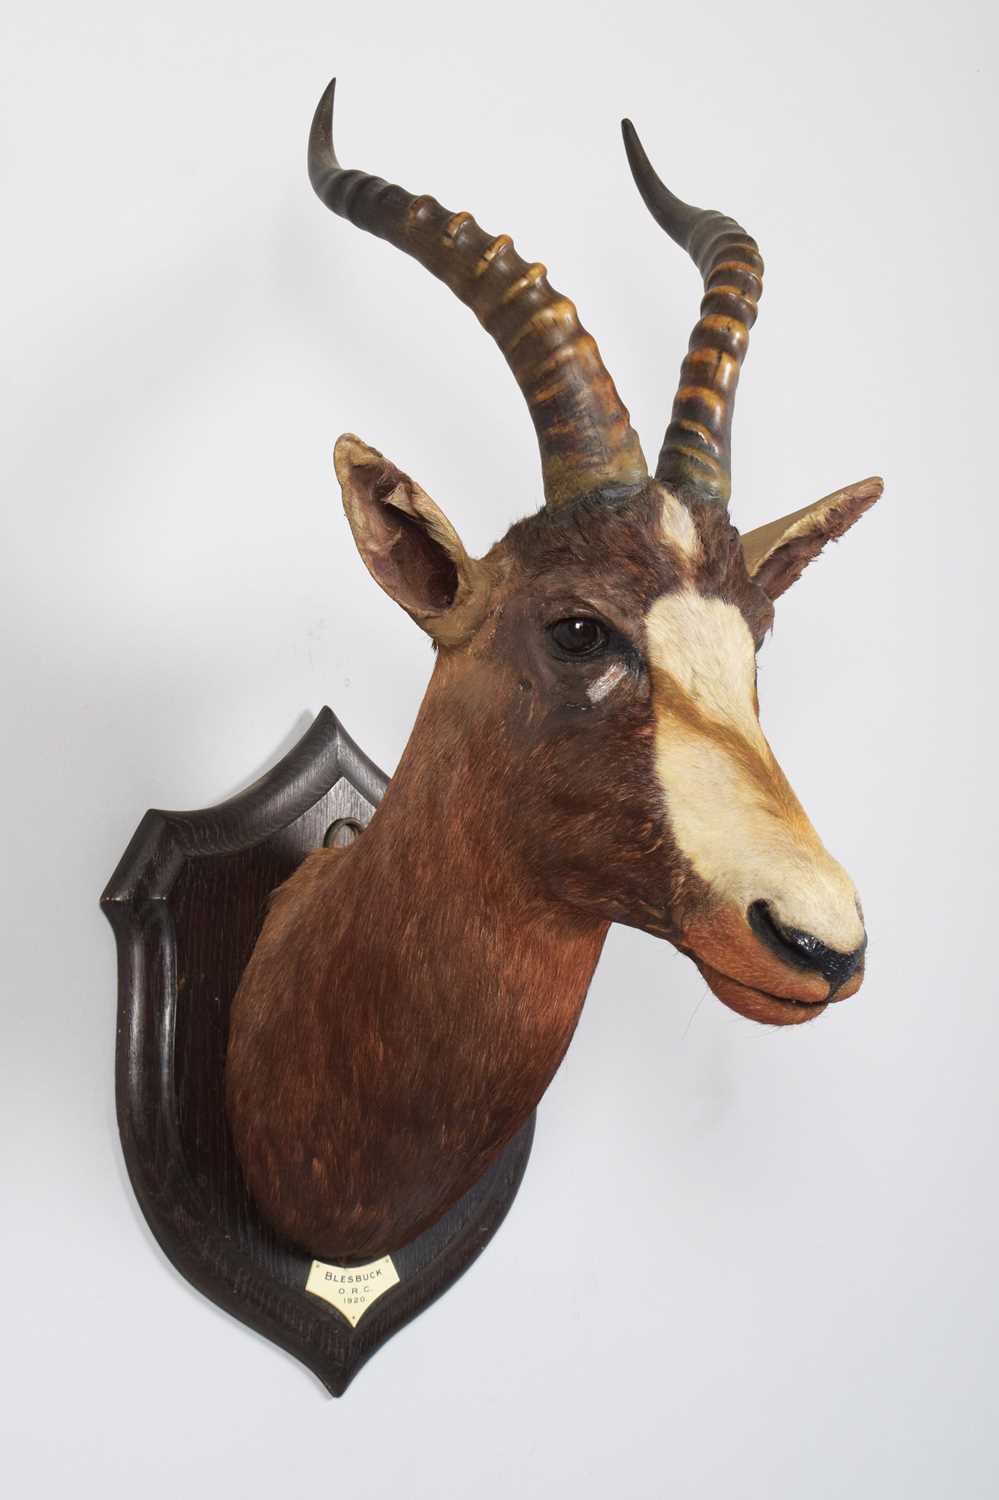 Taxidermy: Blesbok (Damaliscus phillipsi), dated 1920, Orange River Colony, South Africa, a high